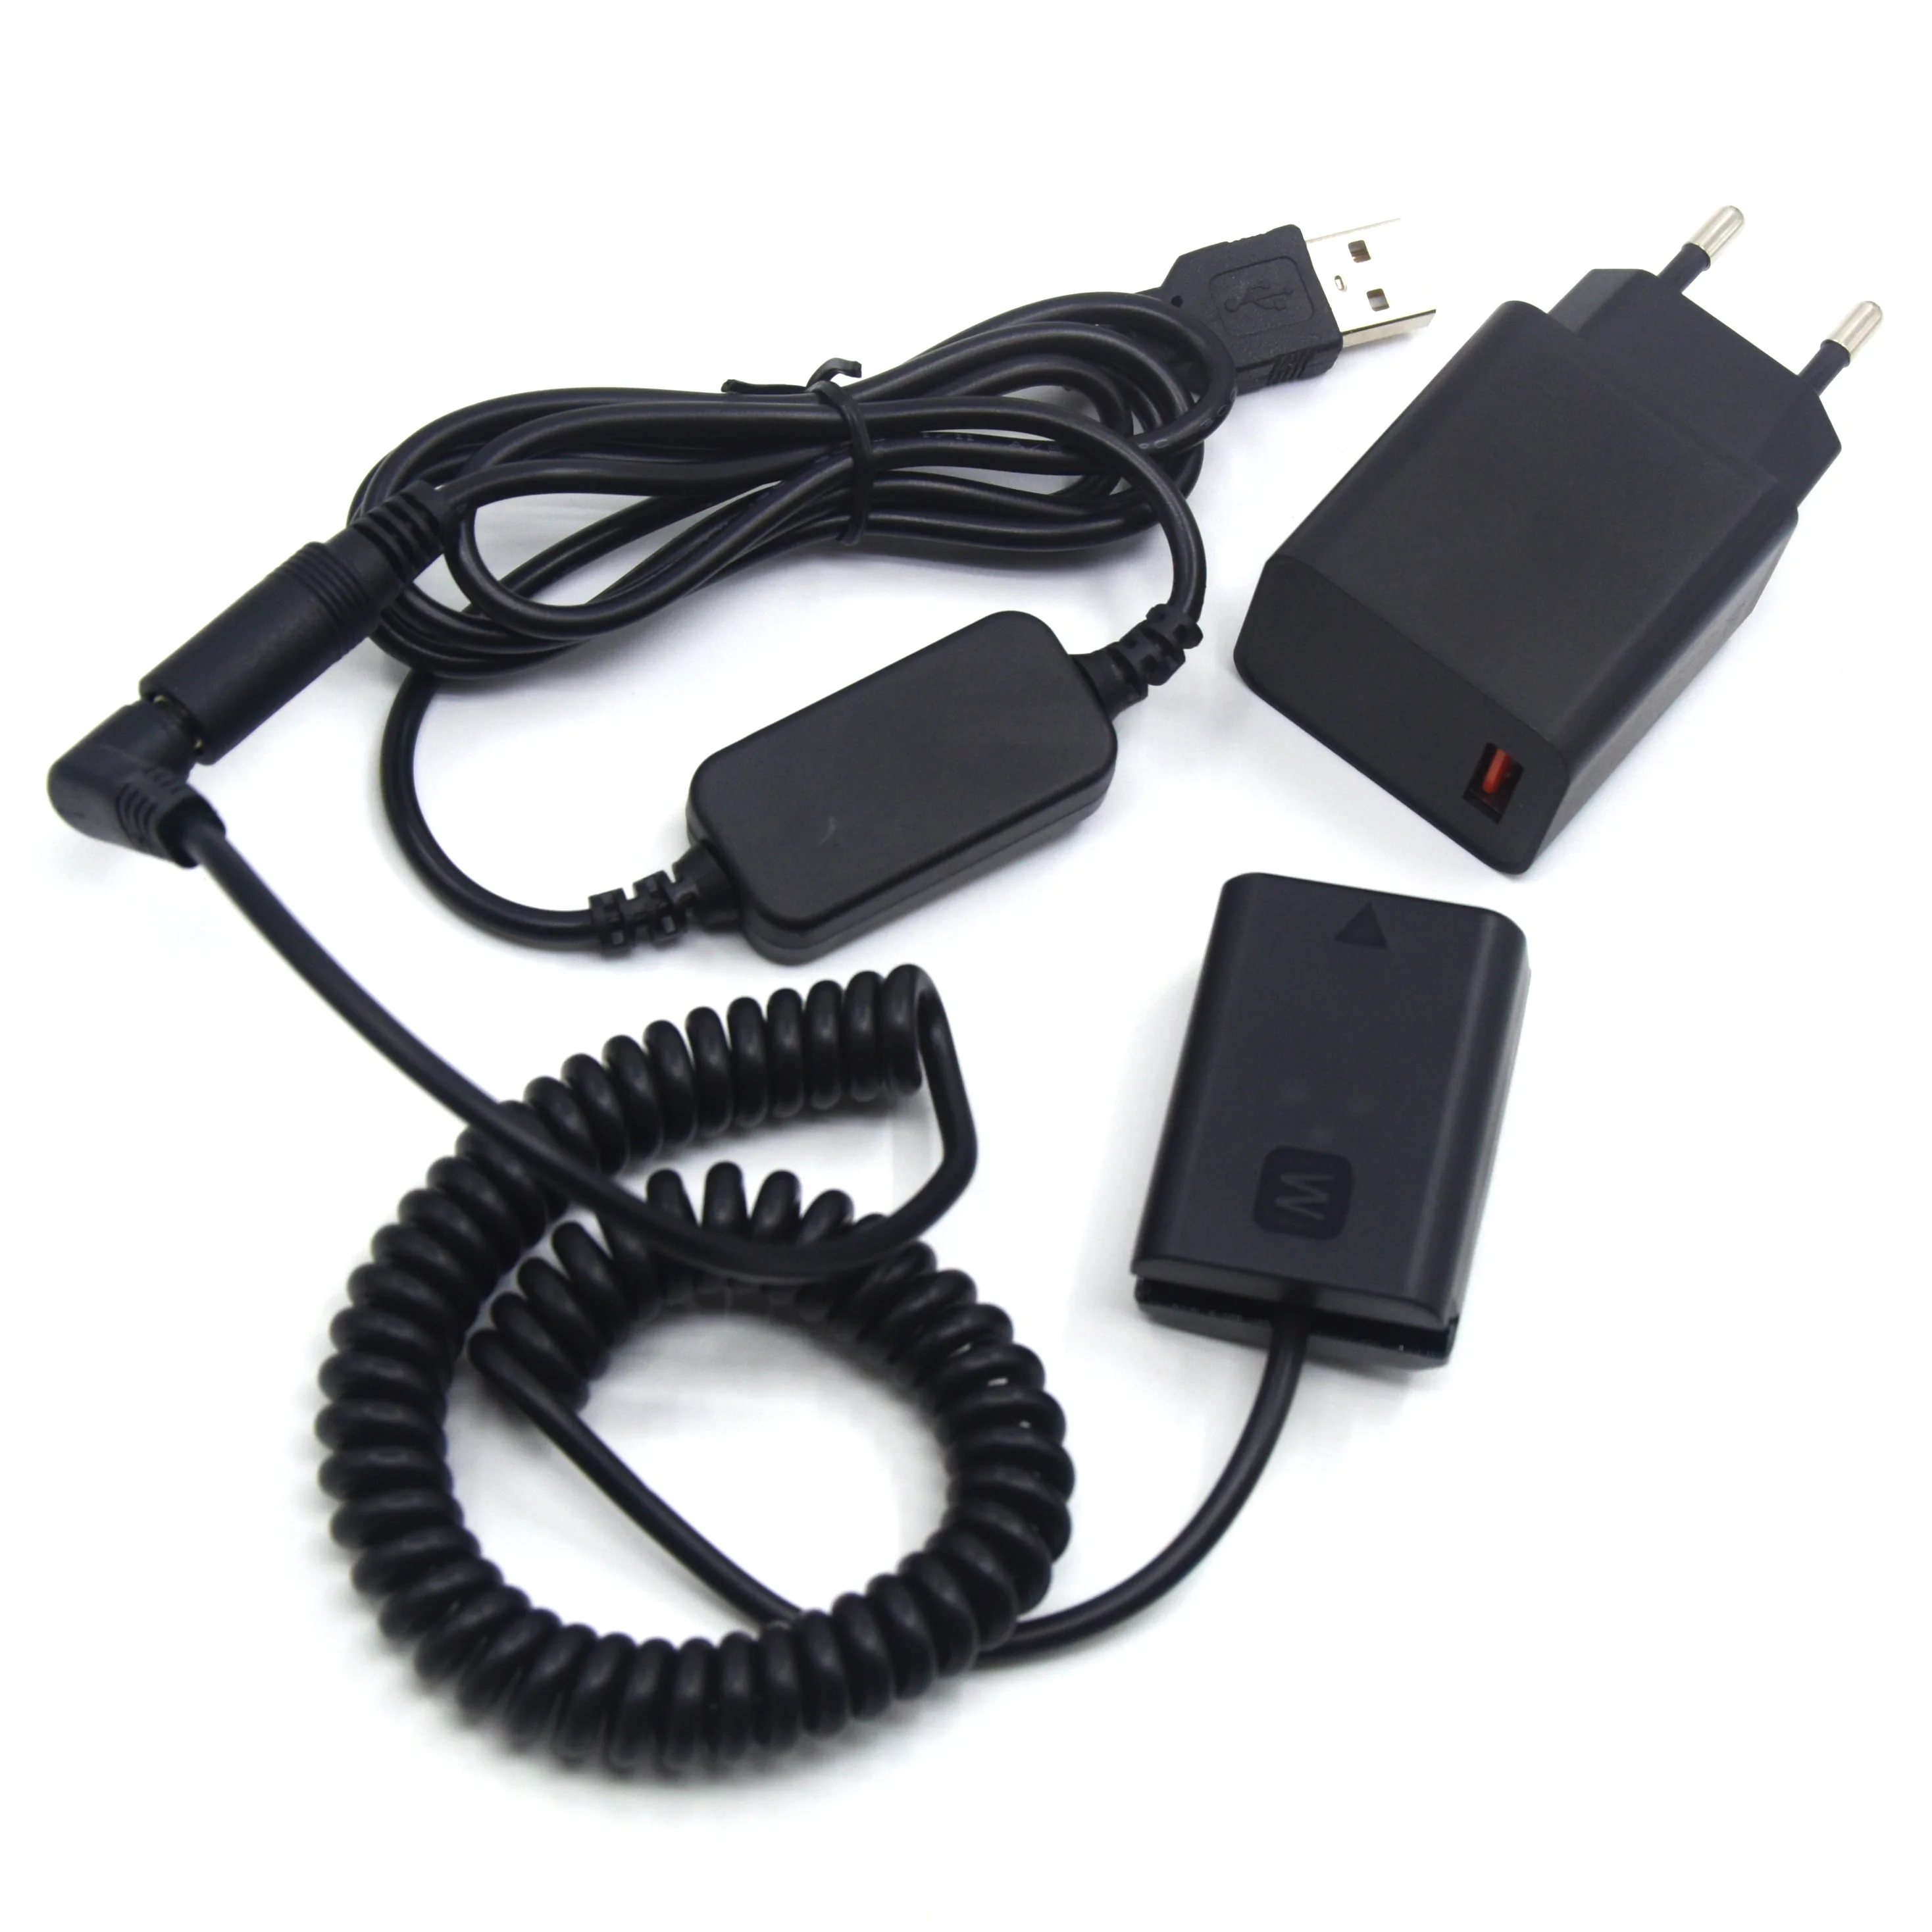 

NP-FW50 AC-PW20 Dummy Battery+QC3.0 Charger+DC Usb Cable For Sony ZV-E10 A6000 A7II A7R A7RII ILCE-QX1 Cybershot DSC-RX10 A7